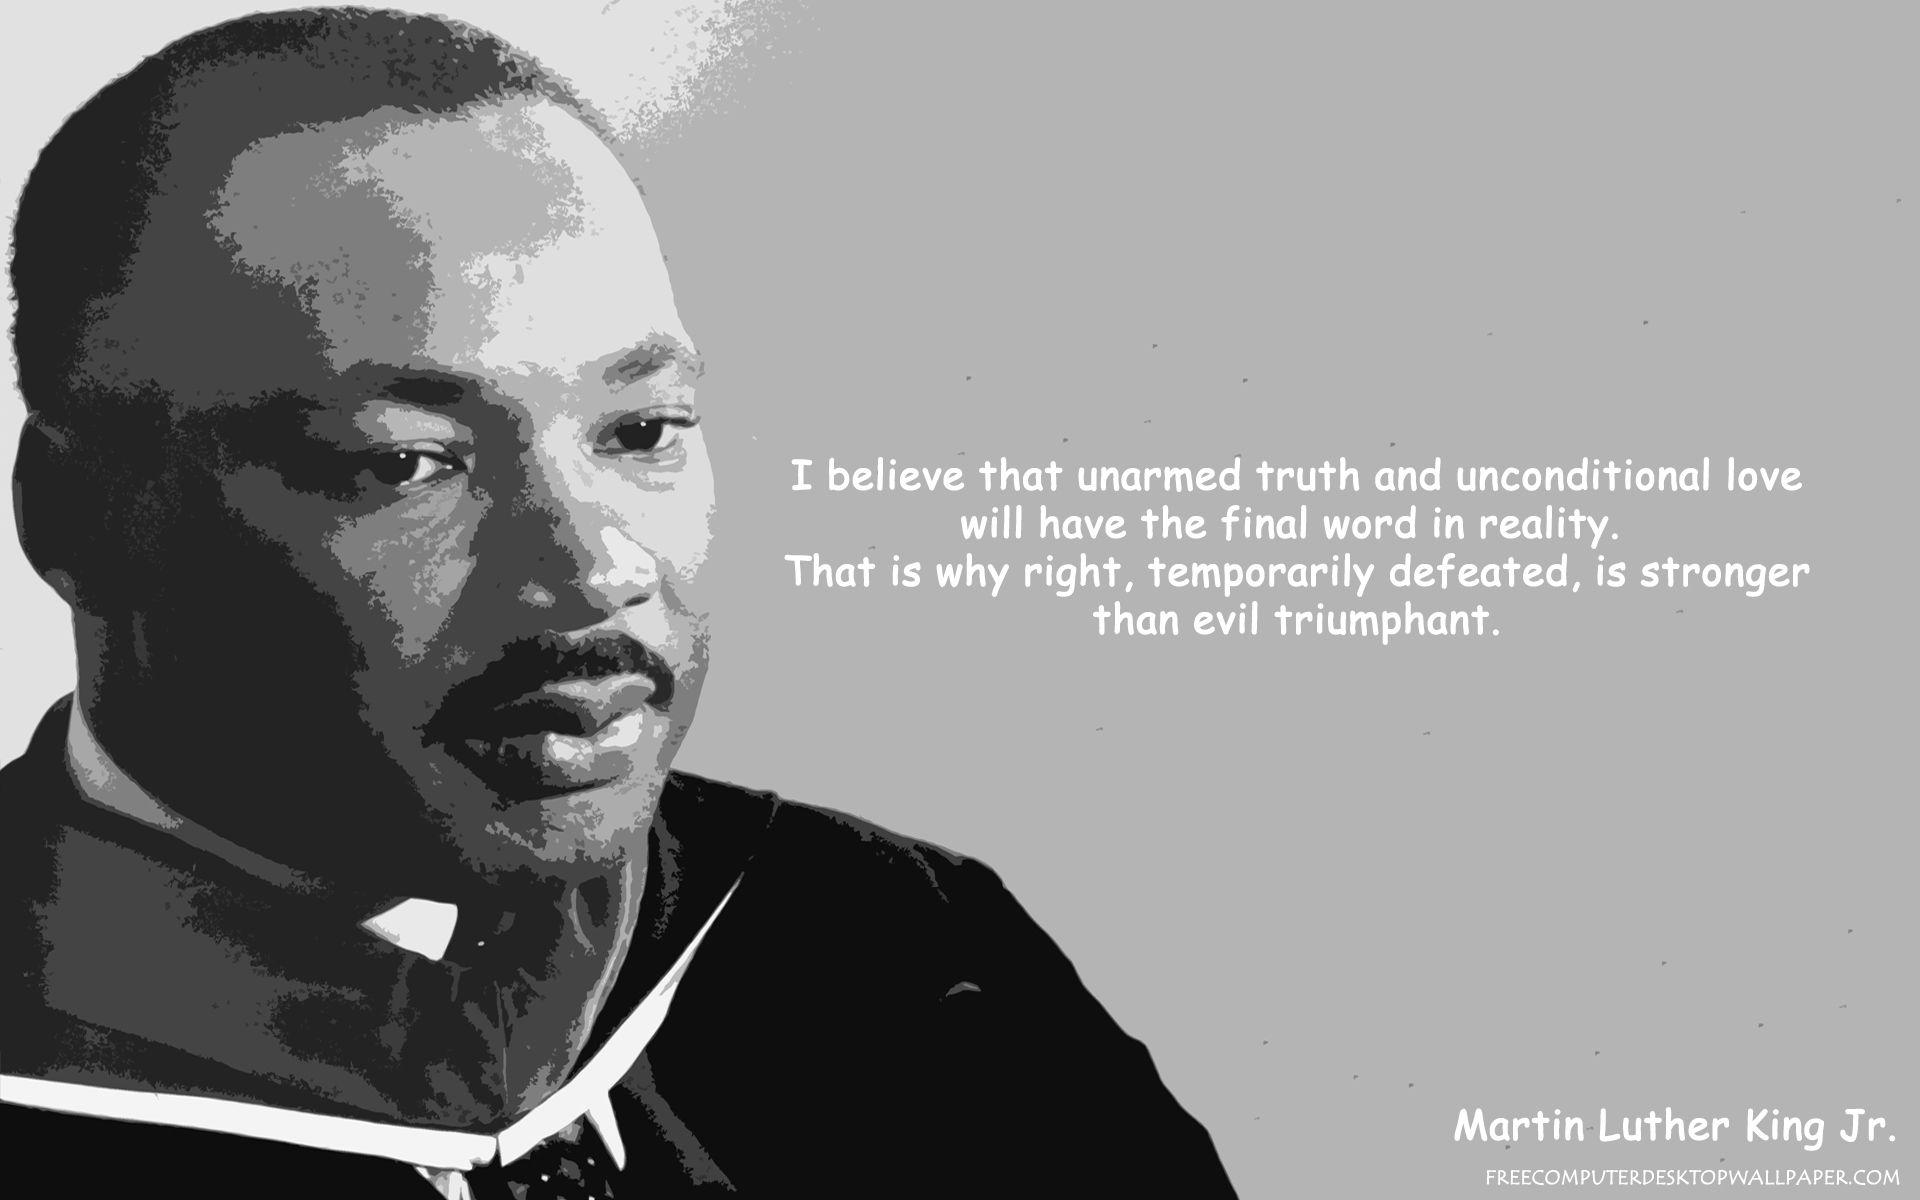 Martin Luther King, Jr. Quotes. Holiday wallpaper